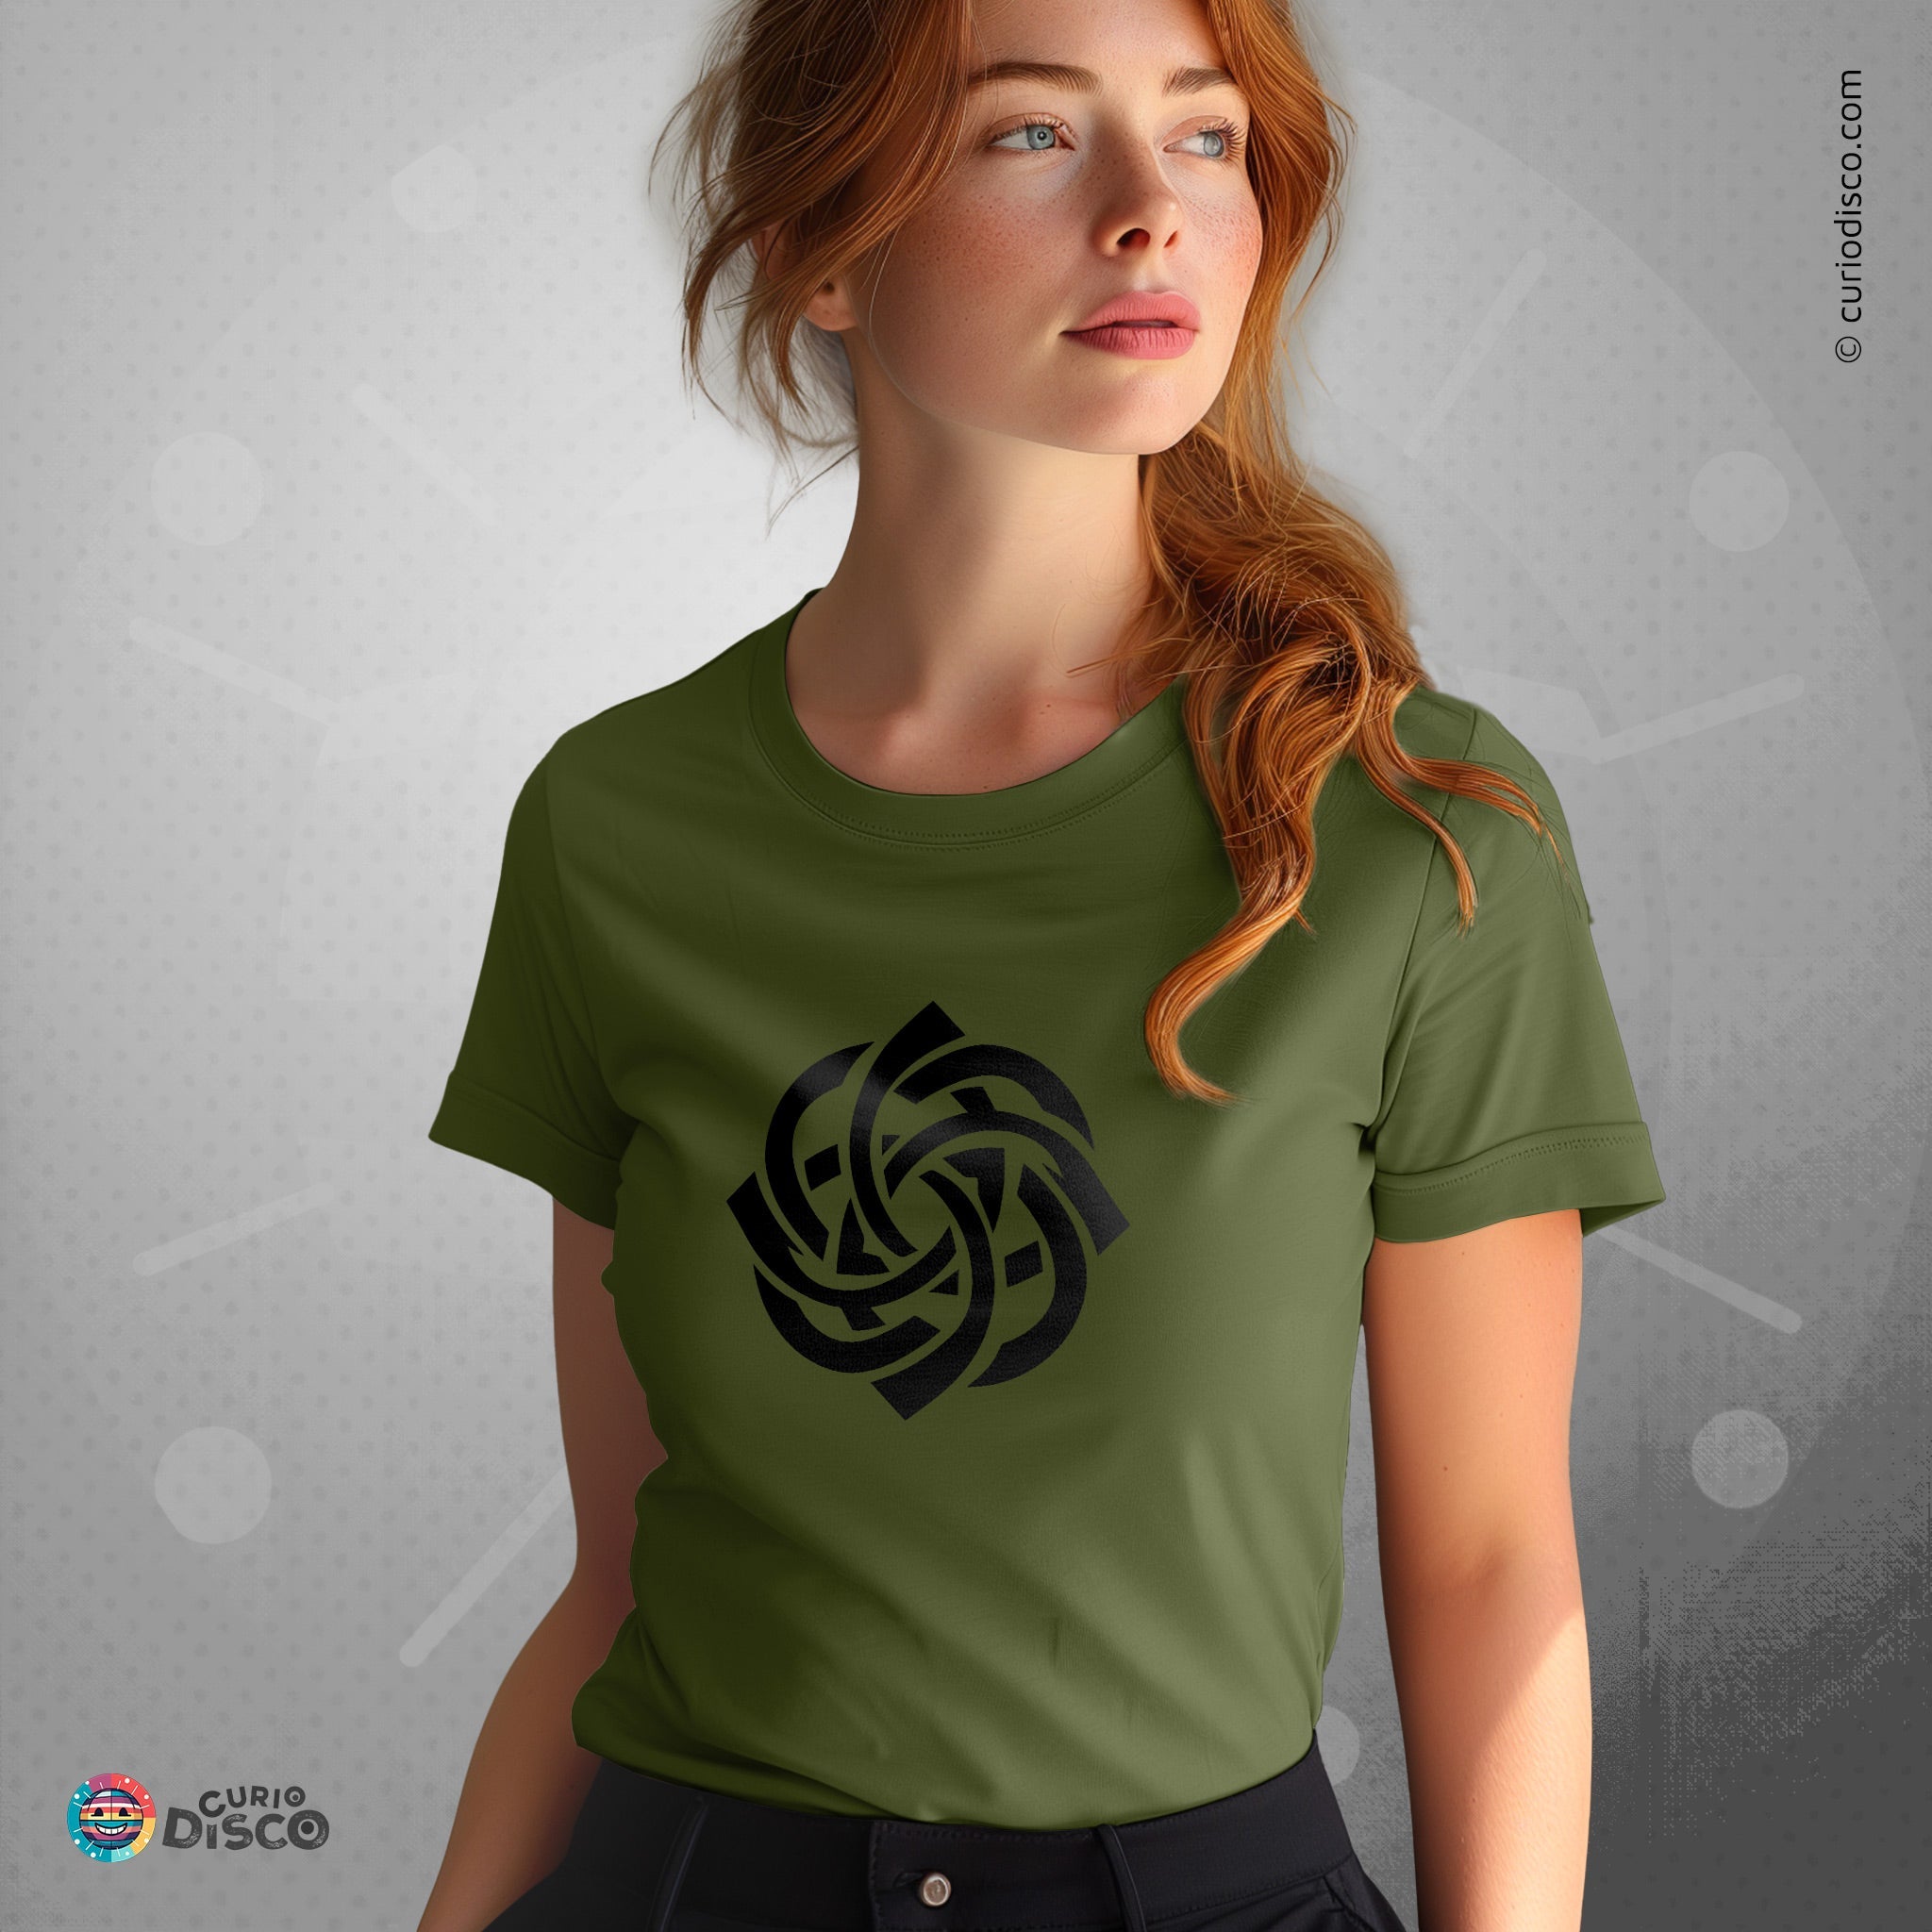 Olive green tree of life yoga shirt with celtic knot, ideal as love knot viking nordic celtic gifts, gifts for wife, yoga gifts for her, plus size clothing for mystical cottage core workout, and gifts for mom.